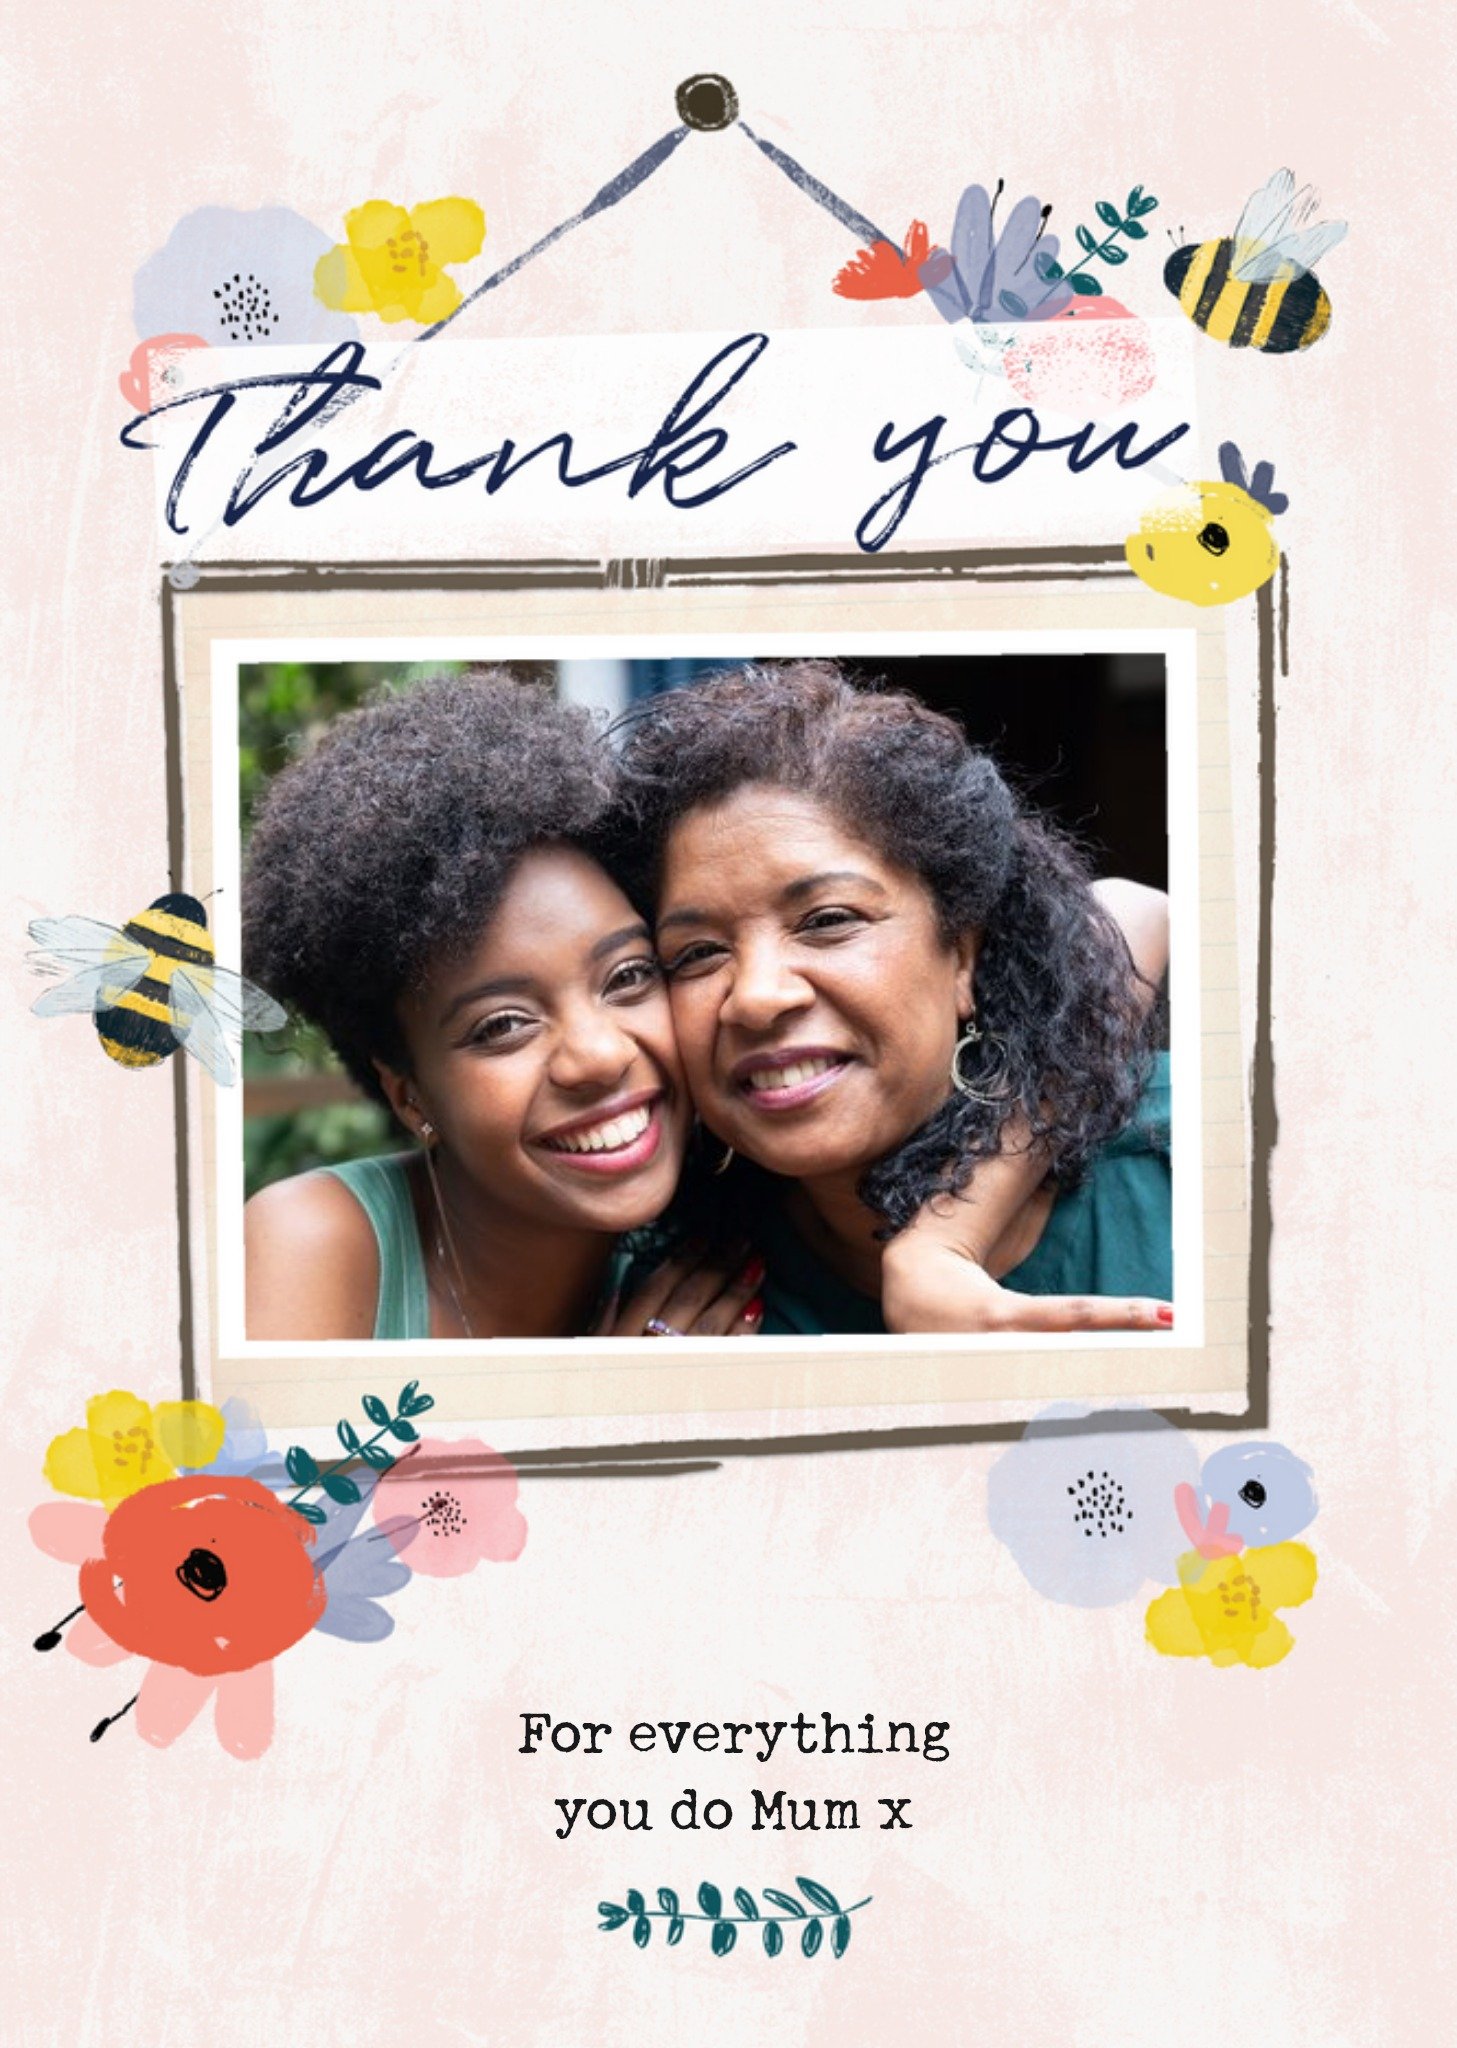 Moonpig Bees Knees Floral Bees Thank You For Everything You Do Mum Photo Upload Card Ecard